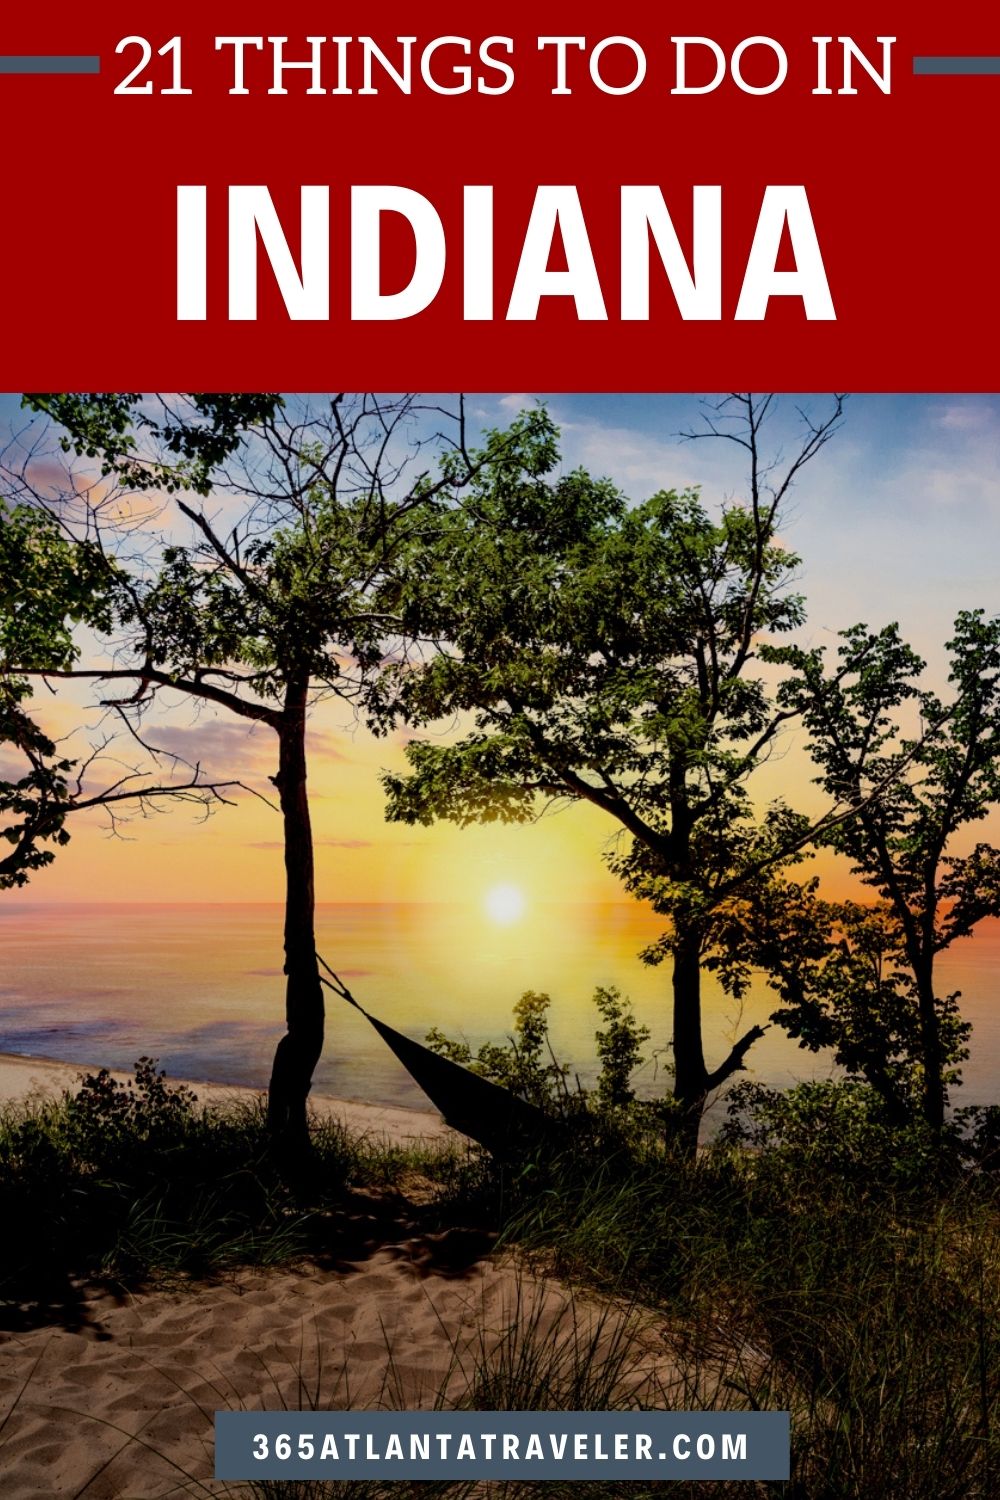 21 Amazing Things To Do in Indiana You Can’t Miss